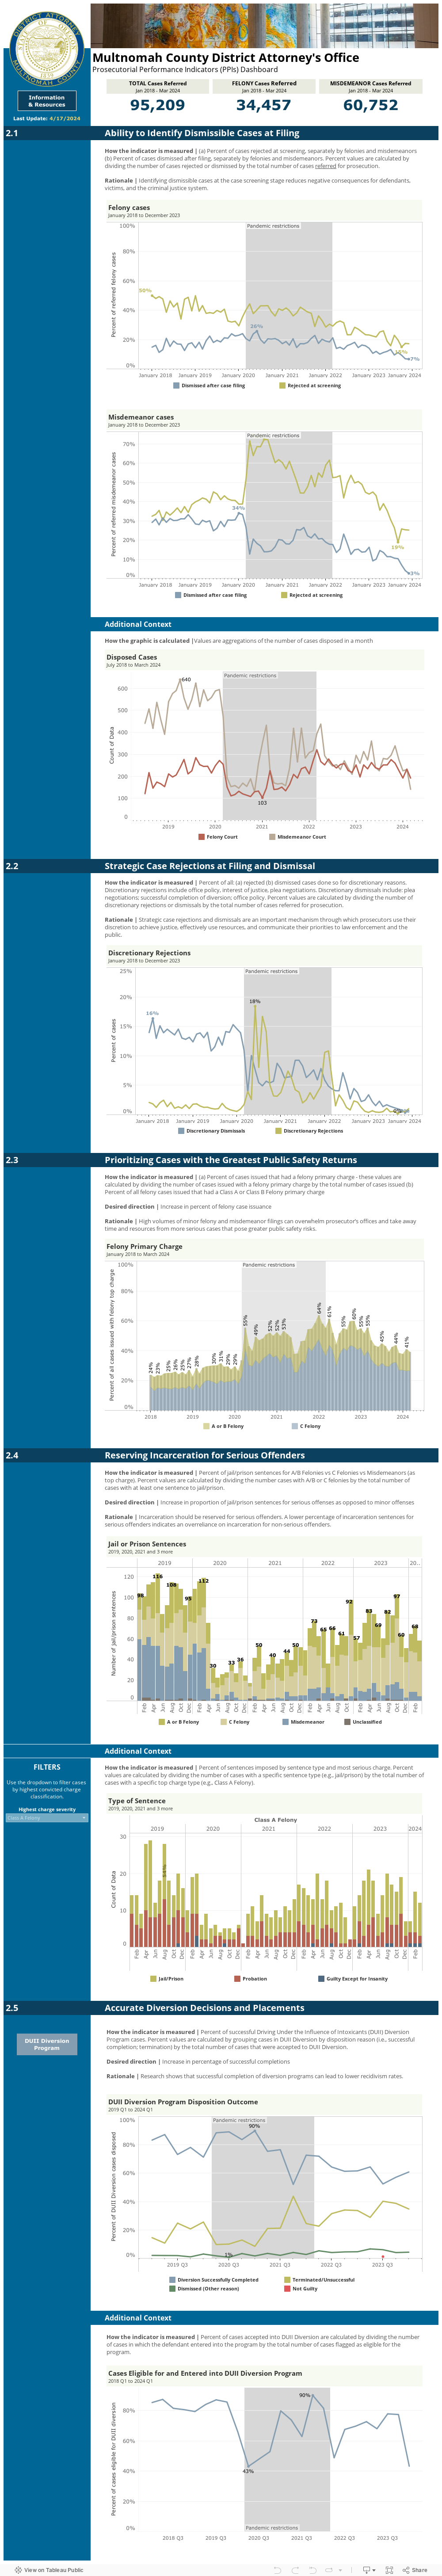                    Multnomah County District Attorney's Office                         Prosecutorial Performance Indicators (PPI) Dashboard
